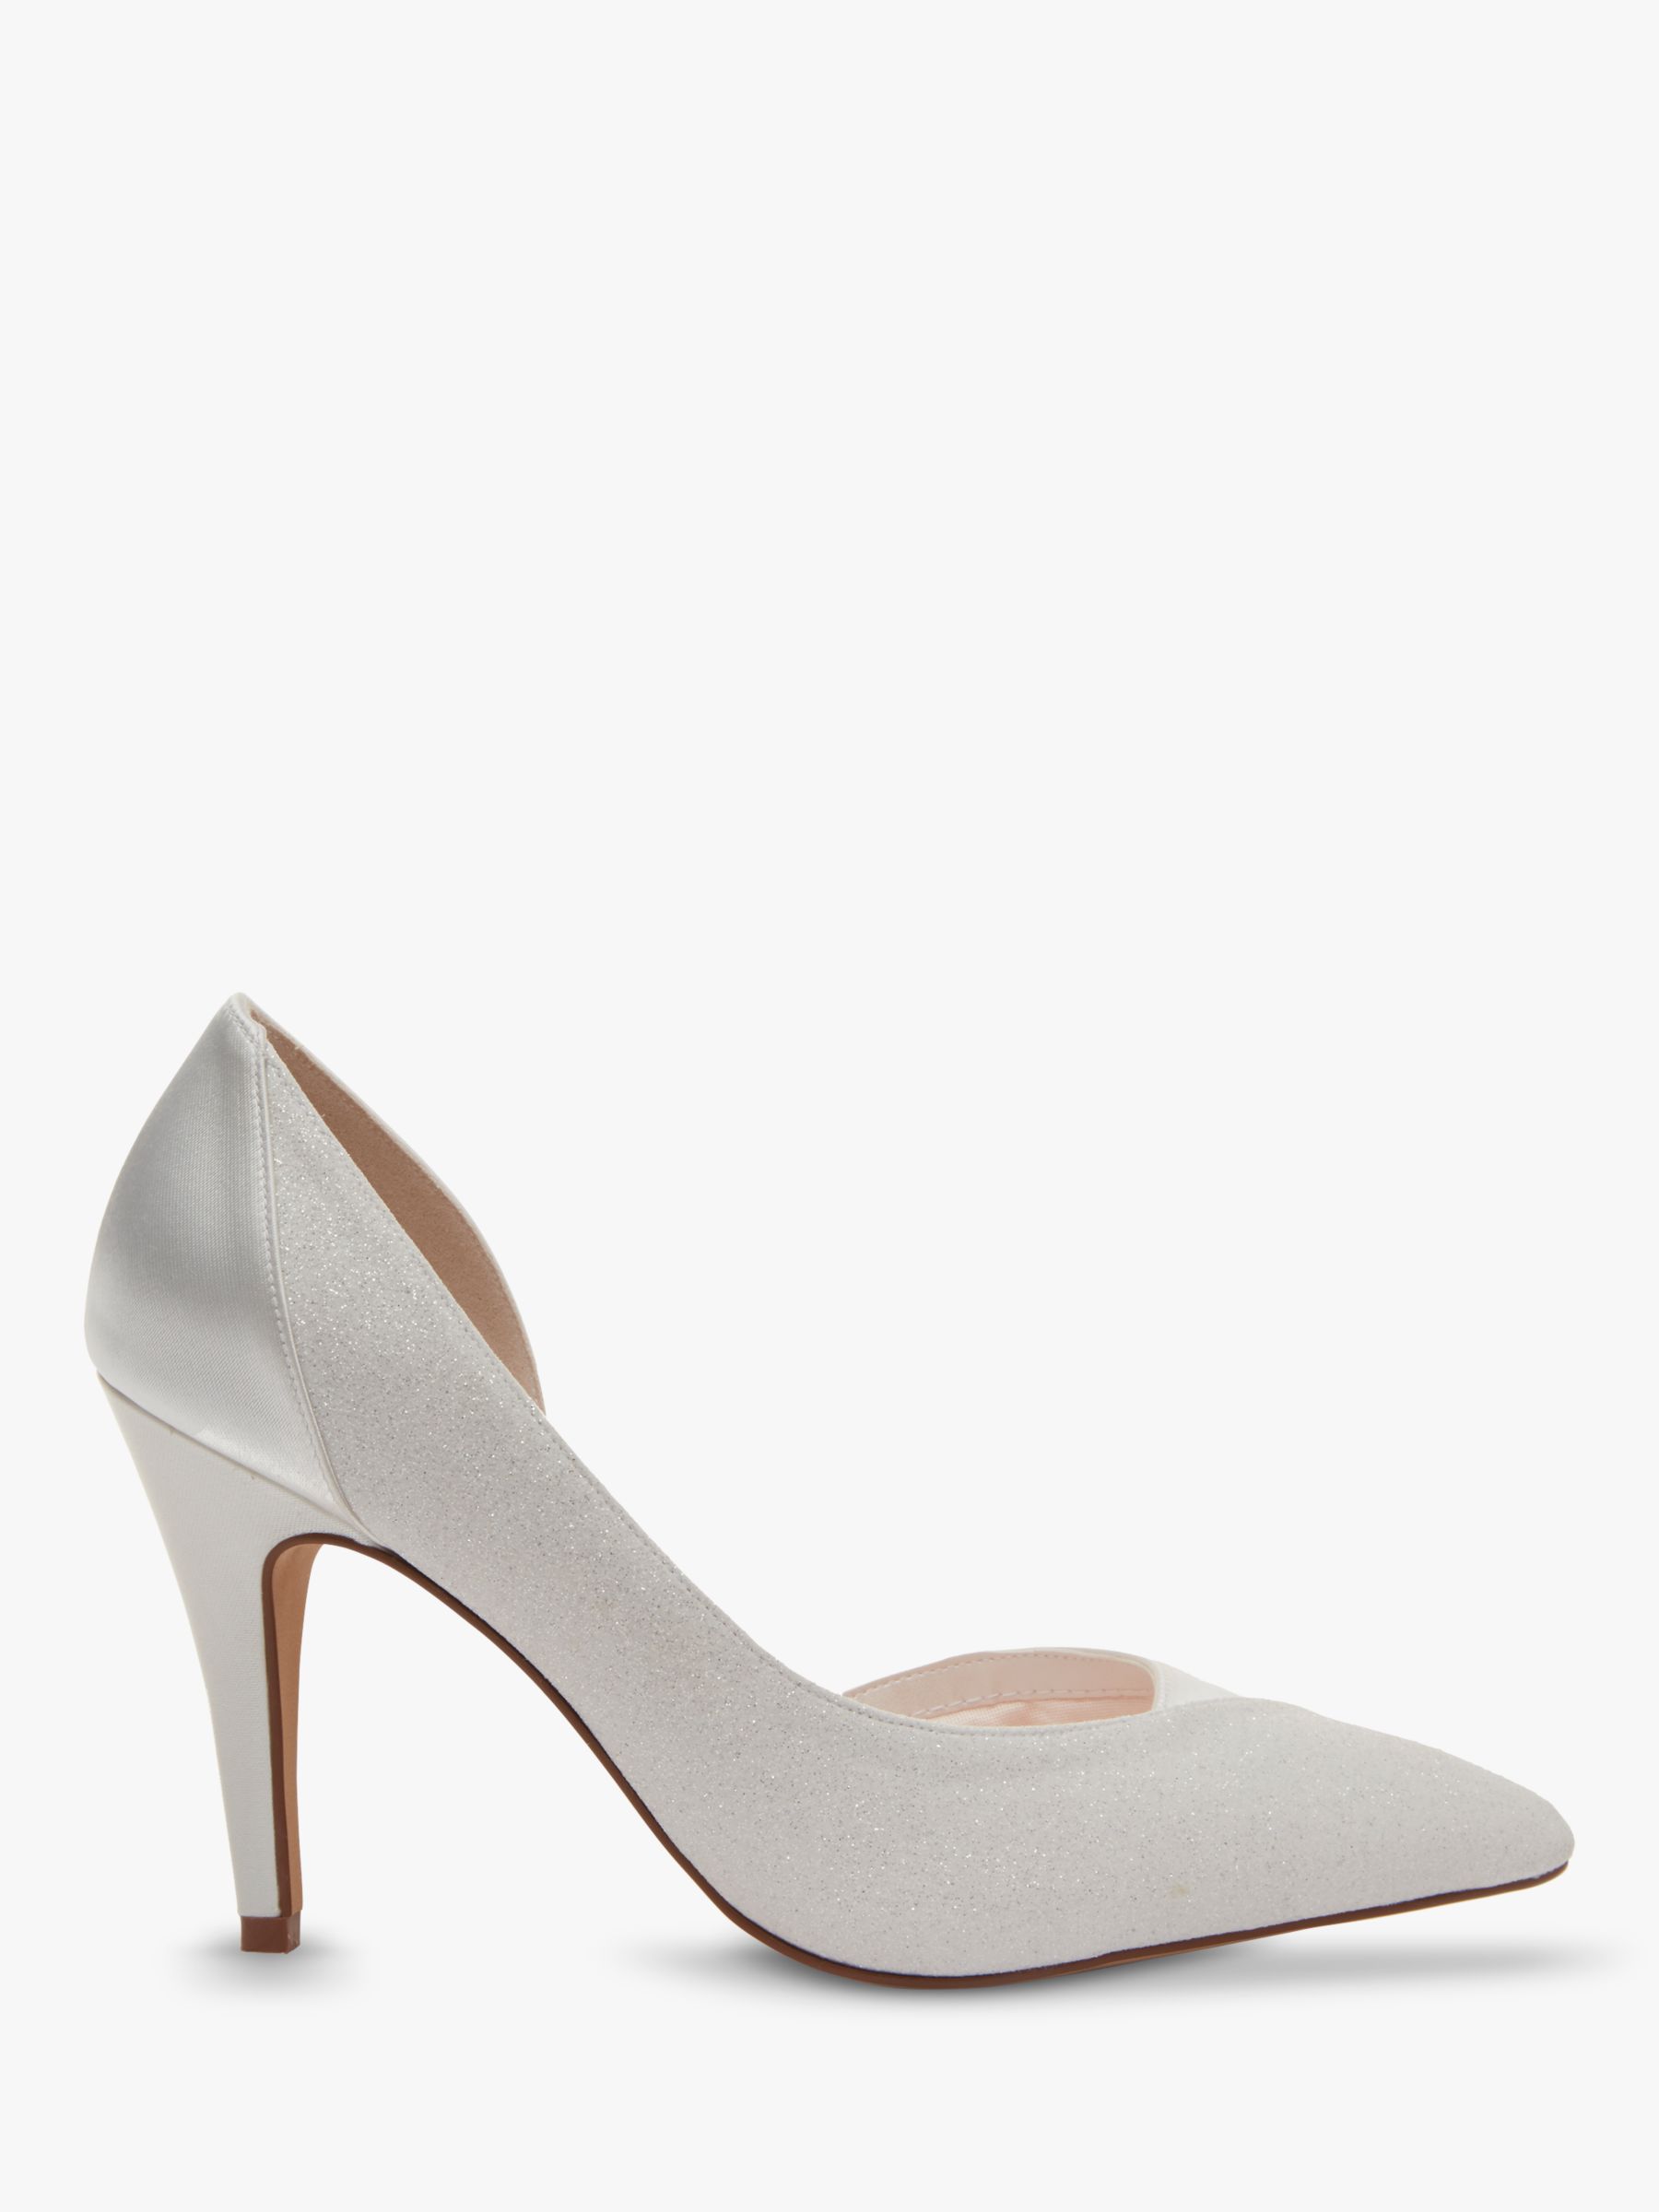 Rainbow Club Roux Pointed Toe Court Shoes, Ivory at John Lewis & Partners